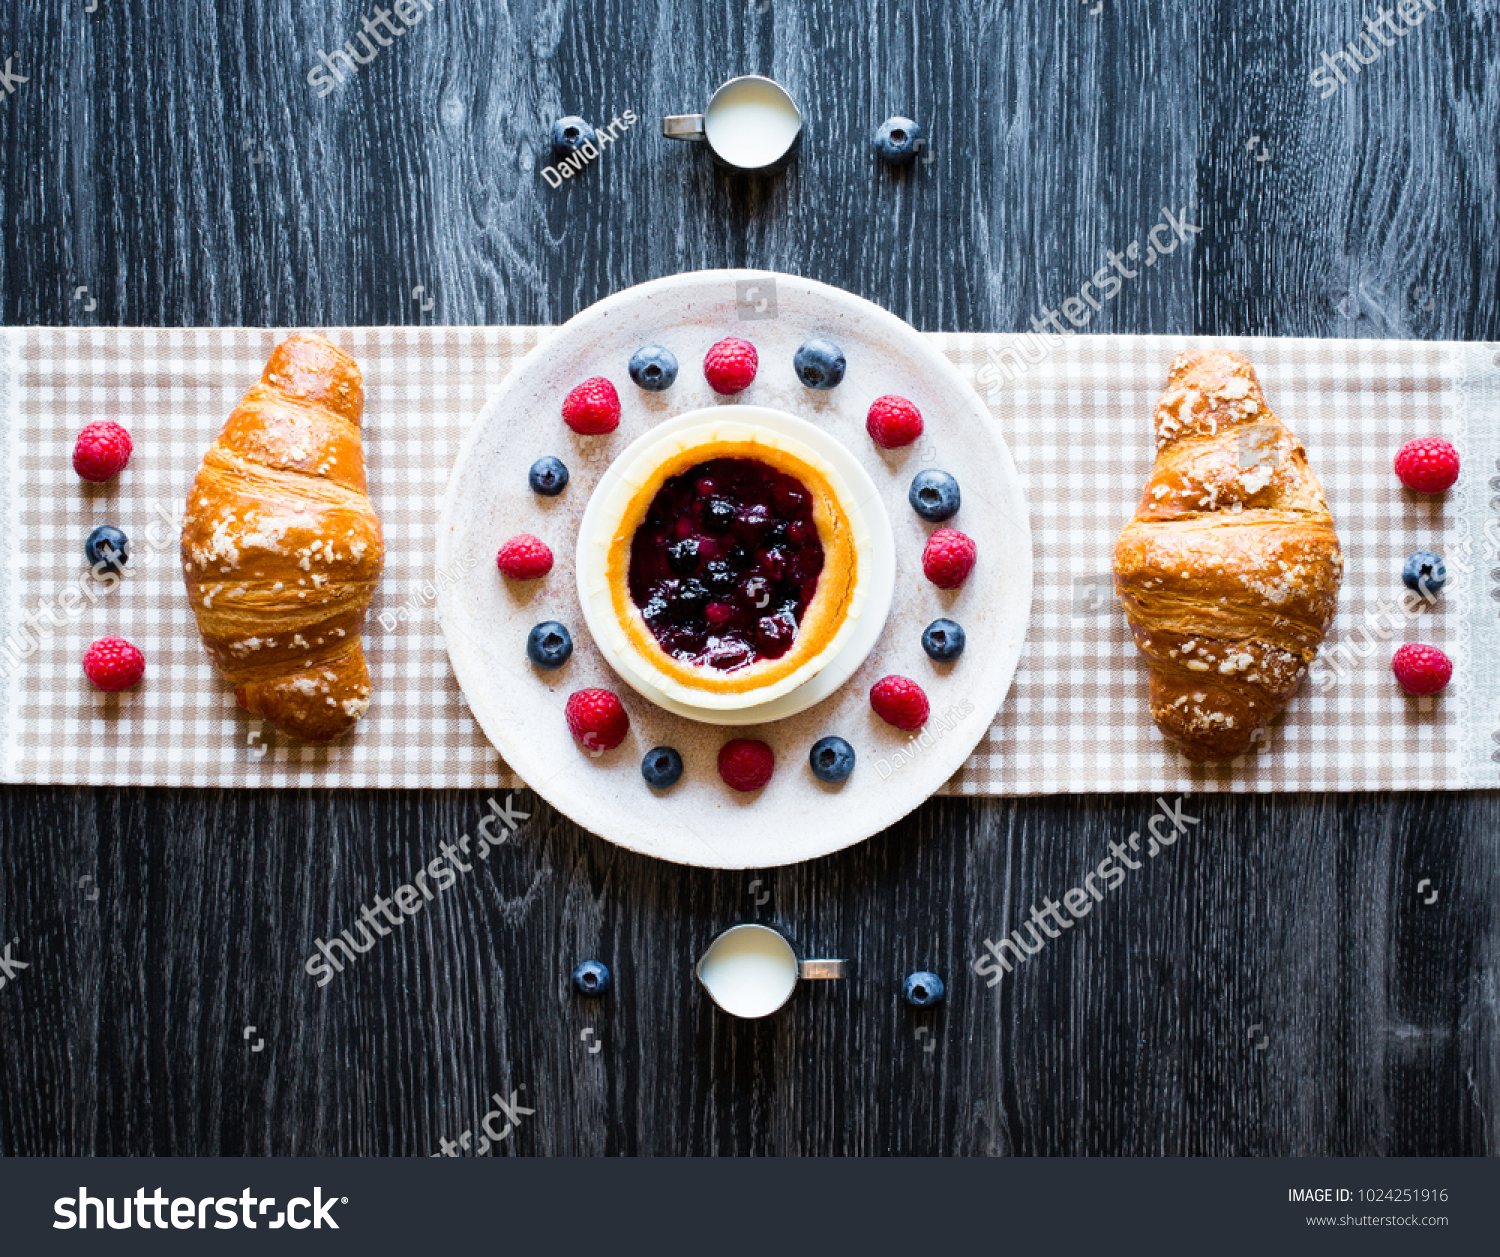 Top view of a wood table full of cakes, fruits, coffee, biscuits, spices and more breakfast classic sweet foods. #1024251916